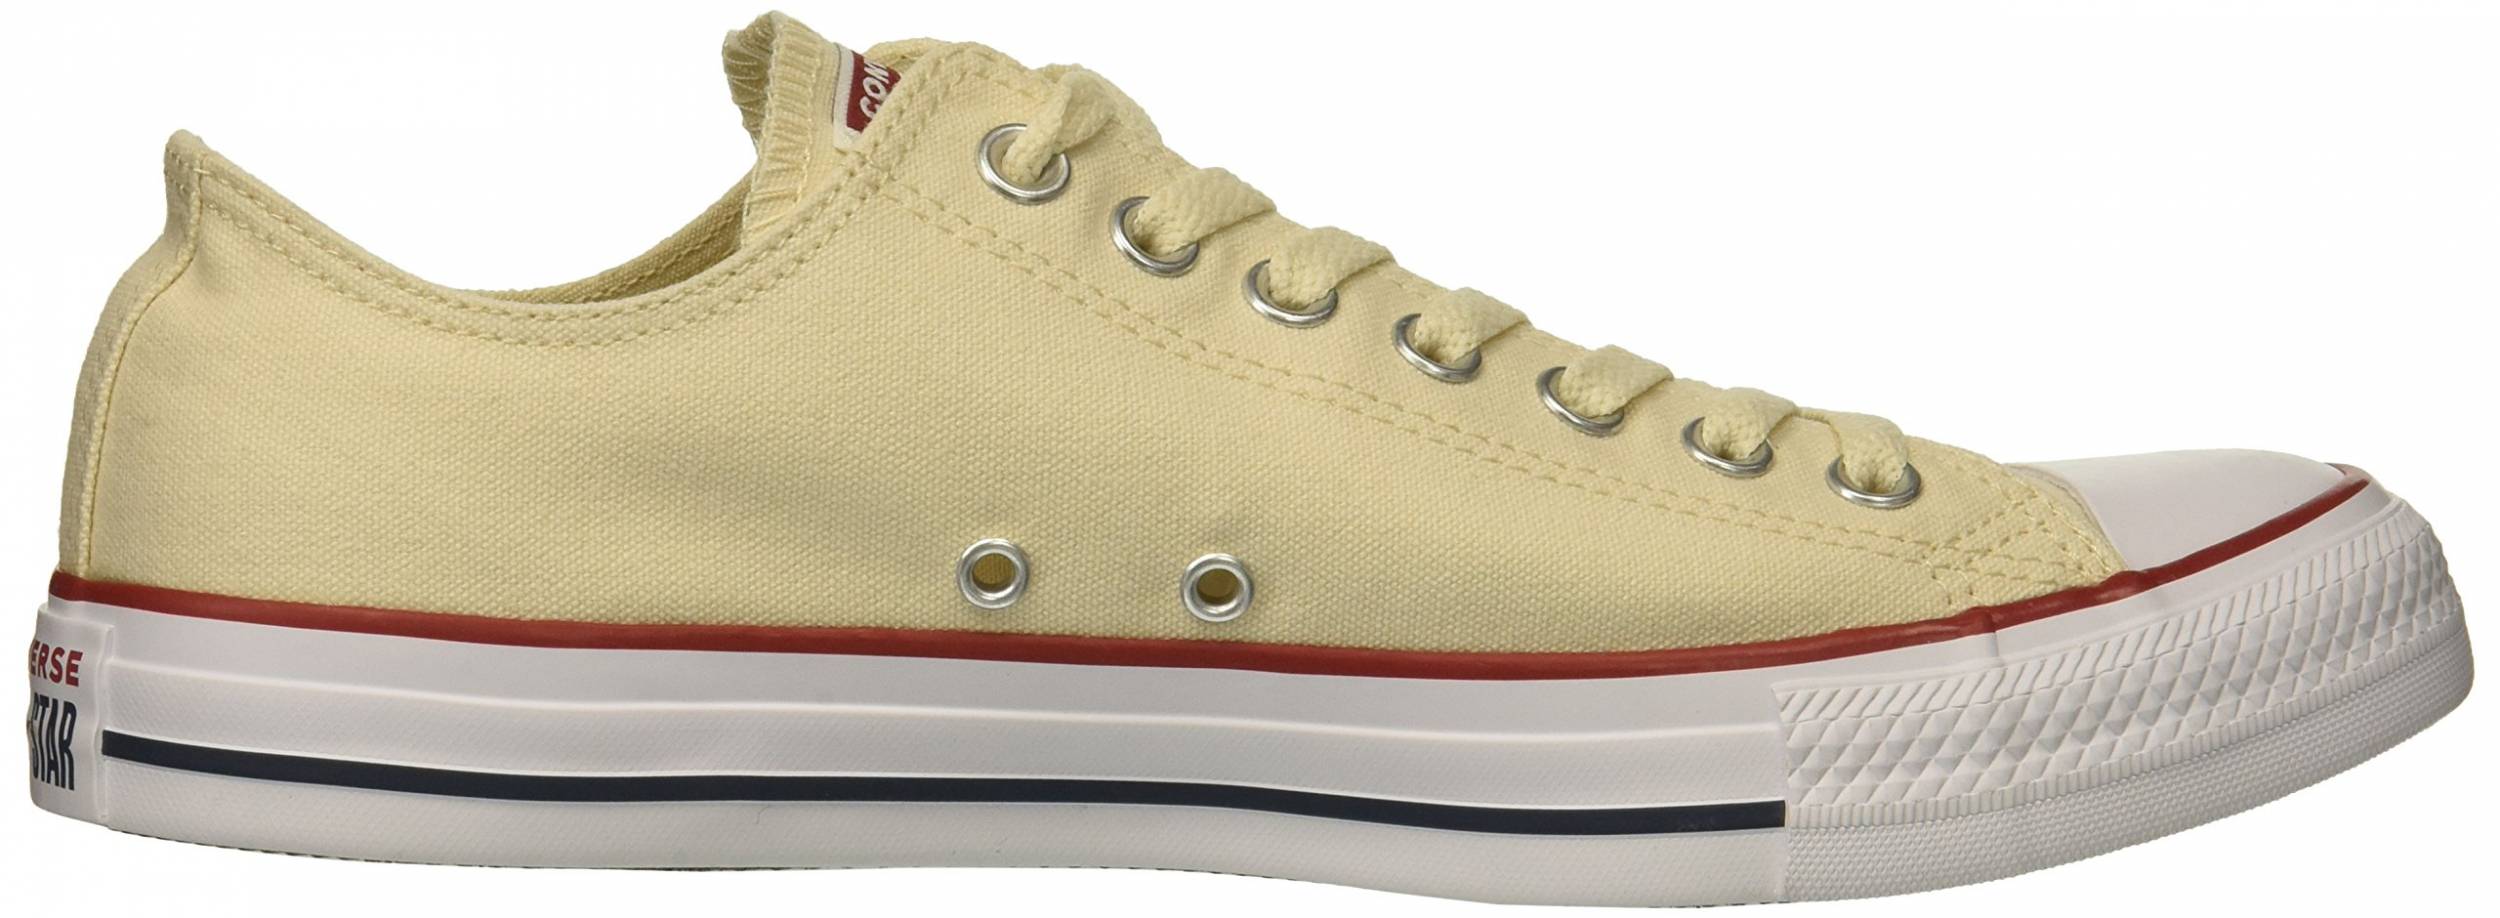 mucus Recur Presenter Converse Chuck Taylor All Star Low Top sneakers in 10+ colors | RunRepeat